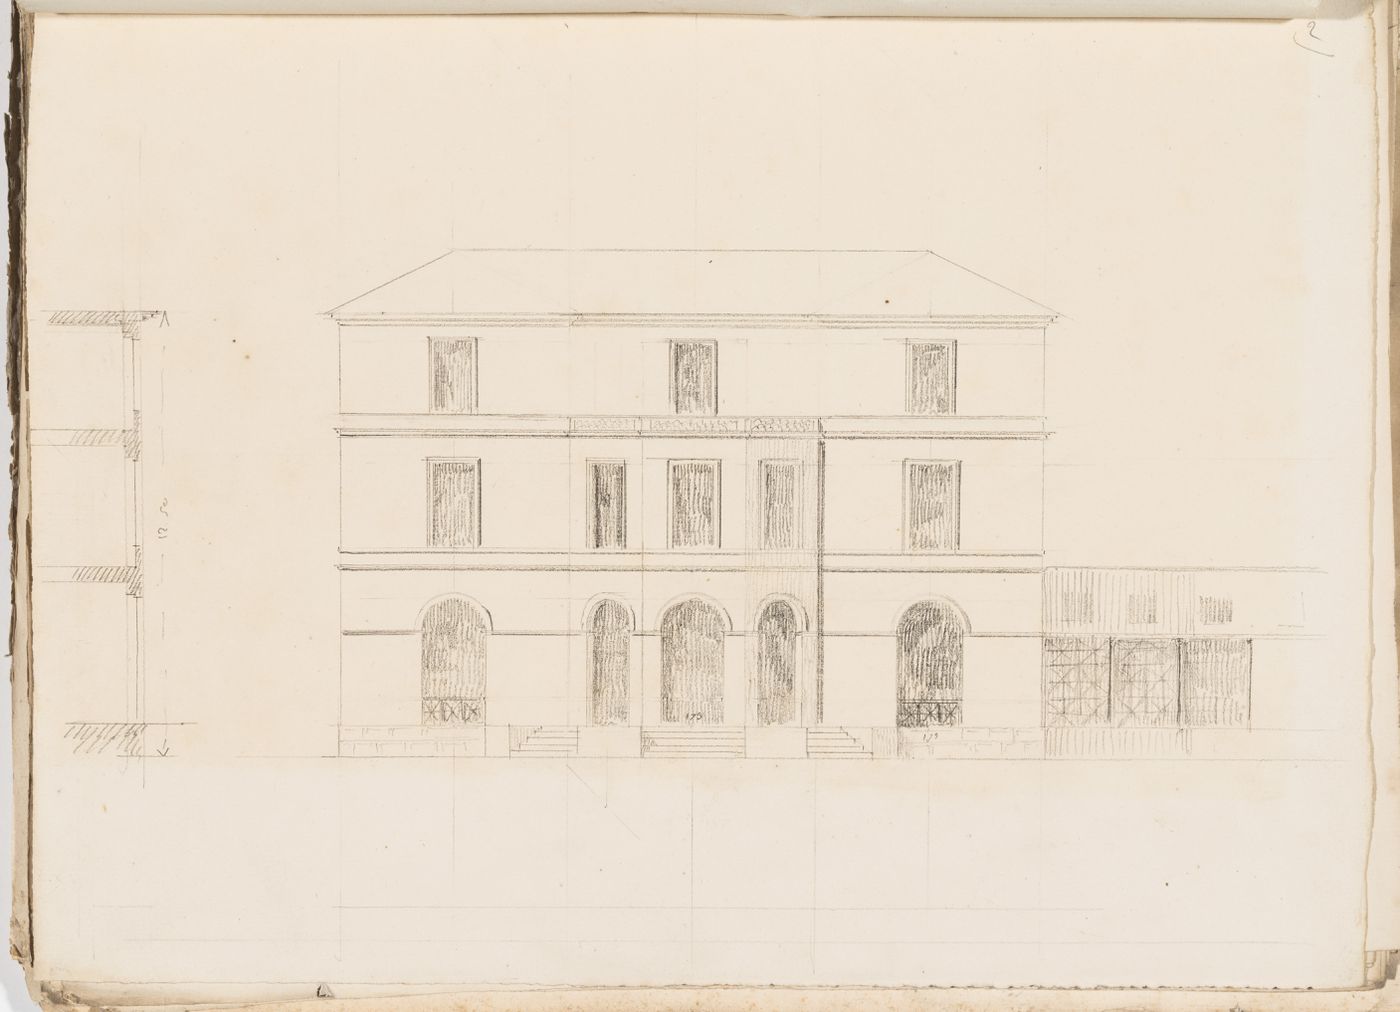 Project no. 2 for a country house for comte Treilhard: Elevation with partial section